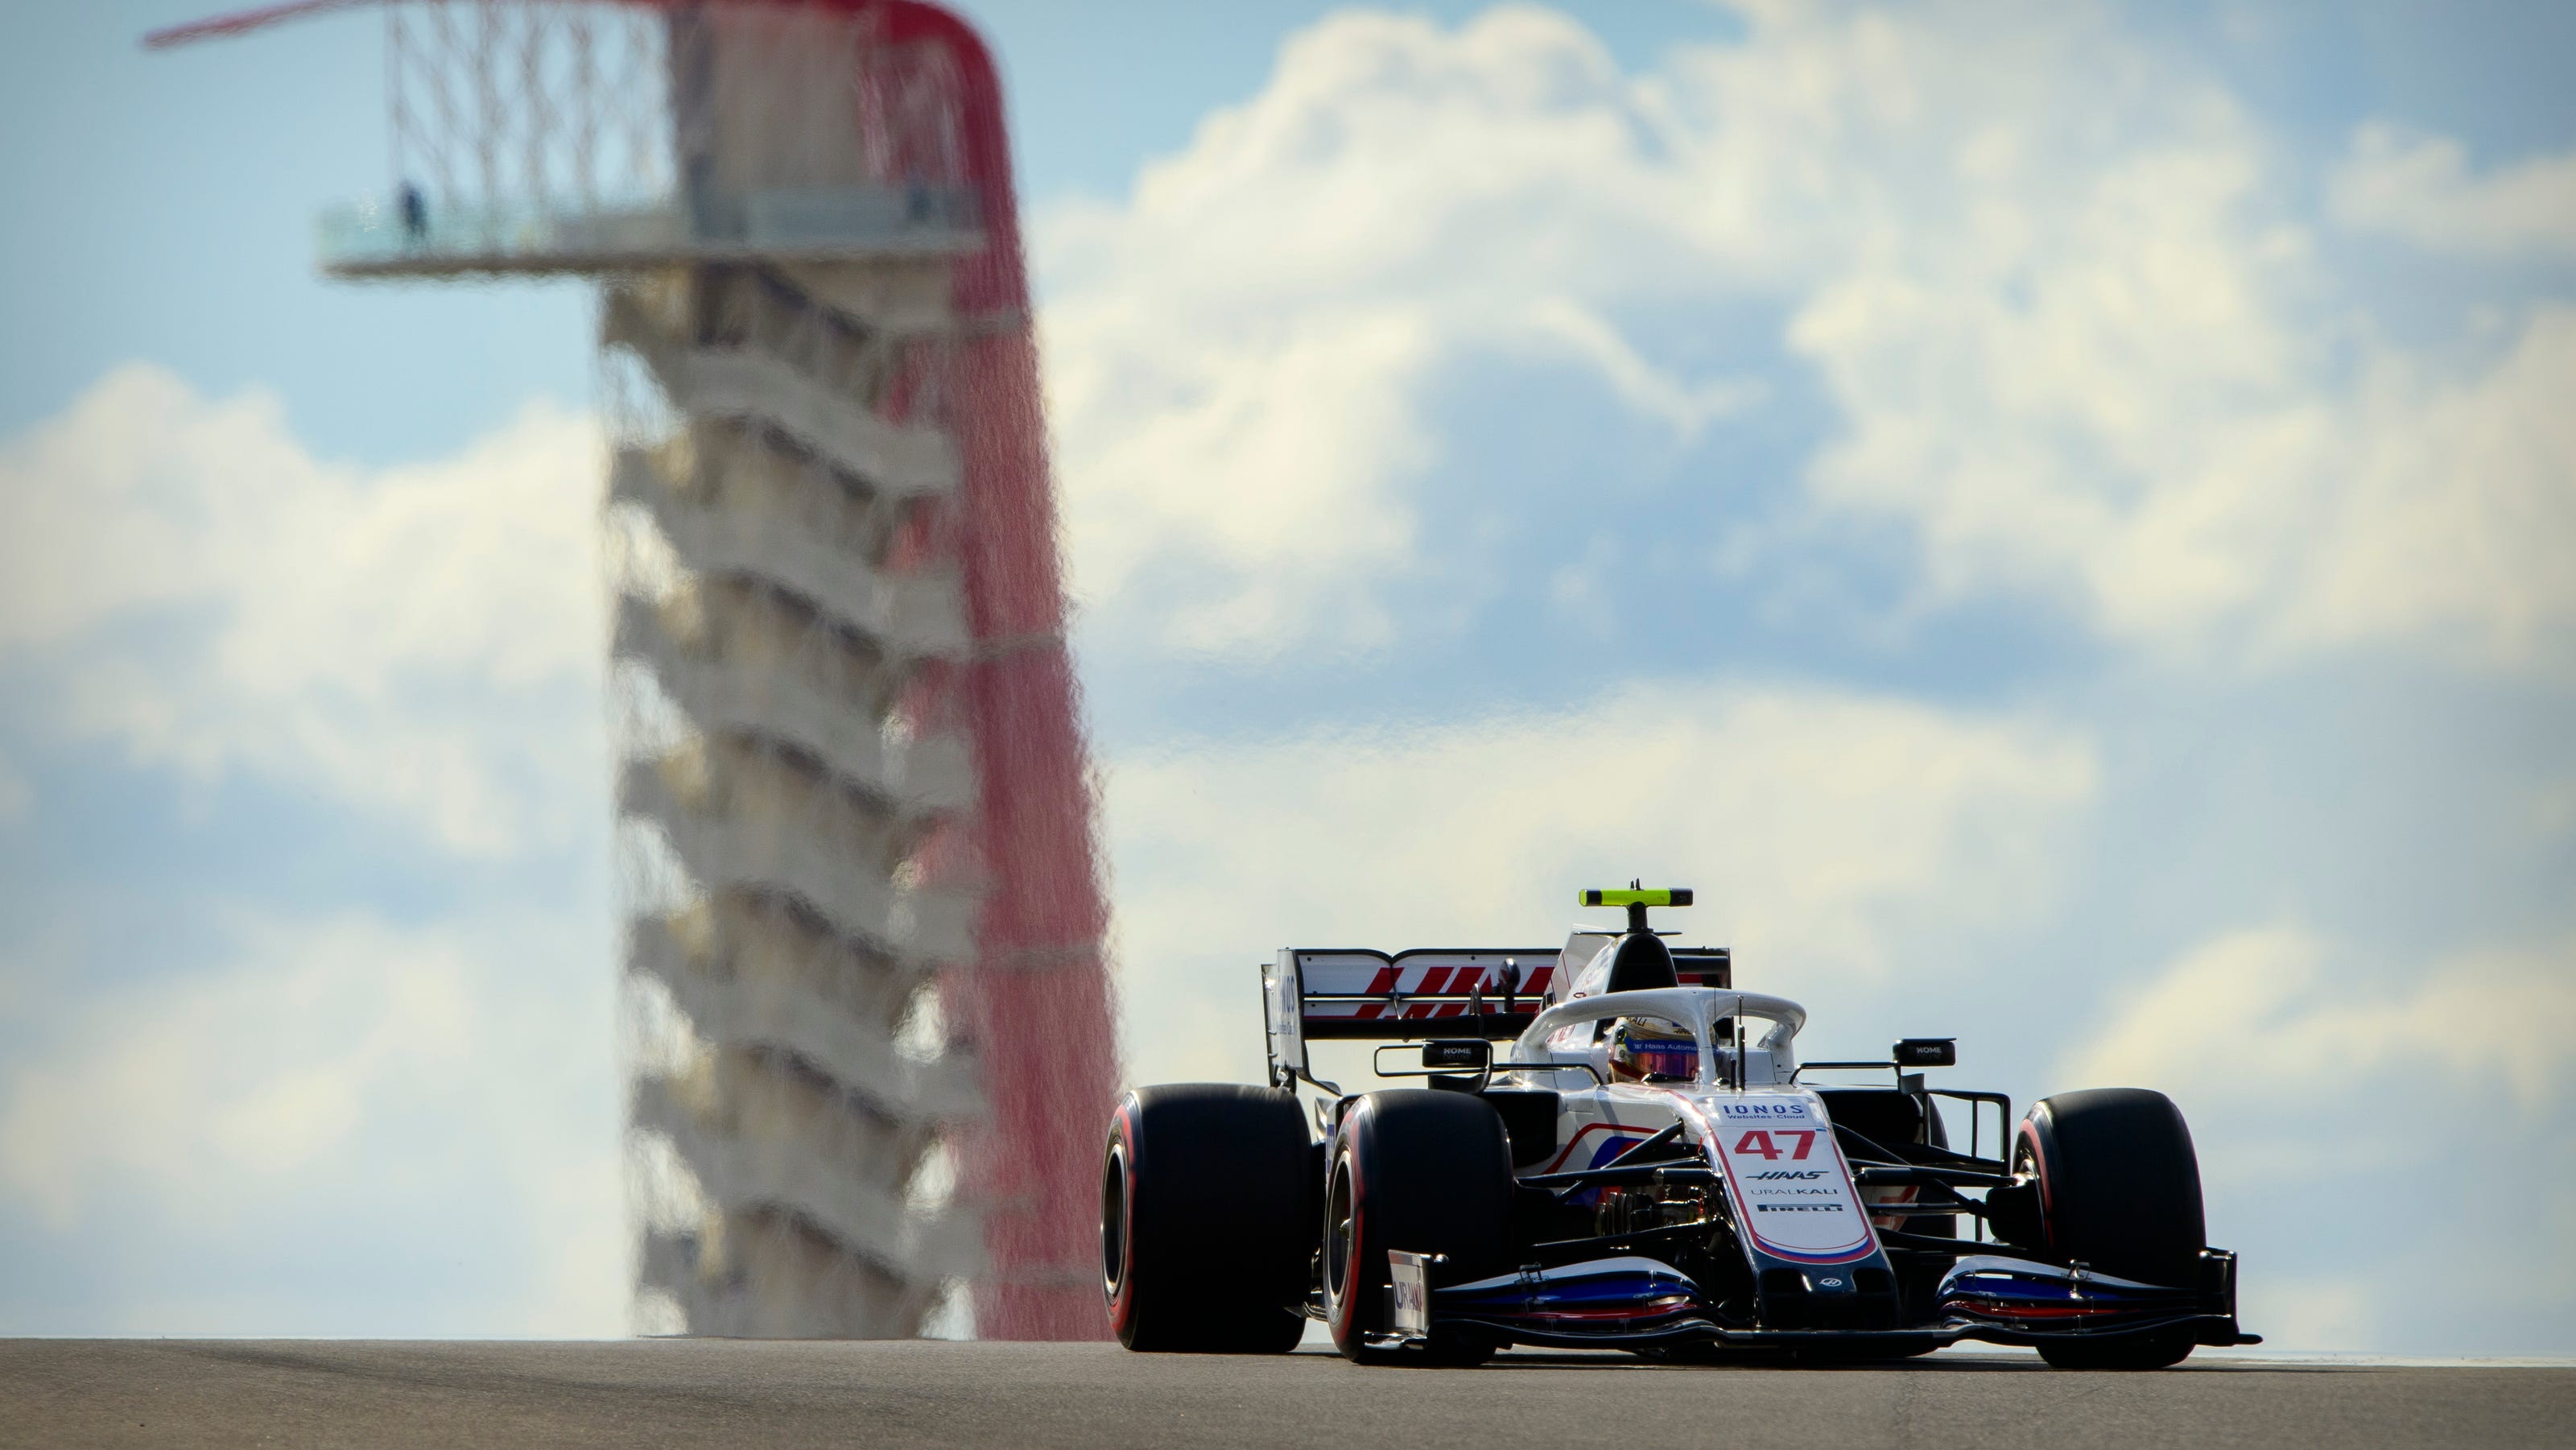 F1 United States Grand Prix at COTA 2022 : What you need to know